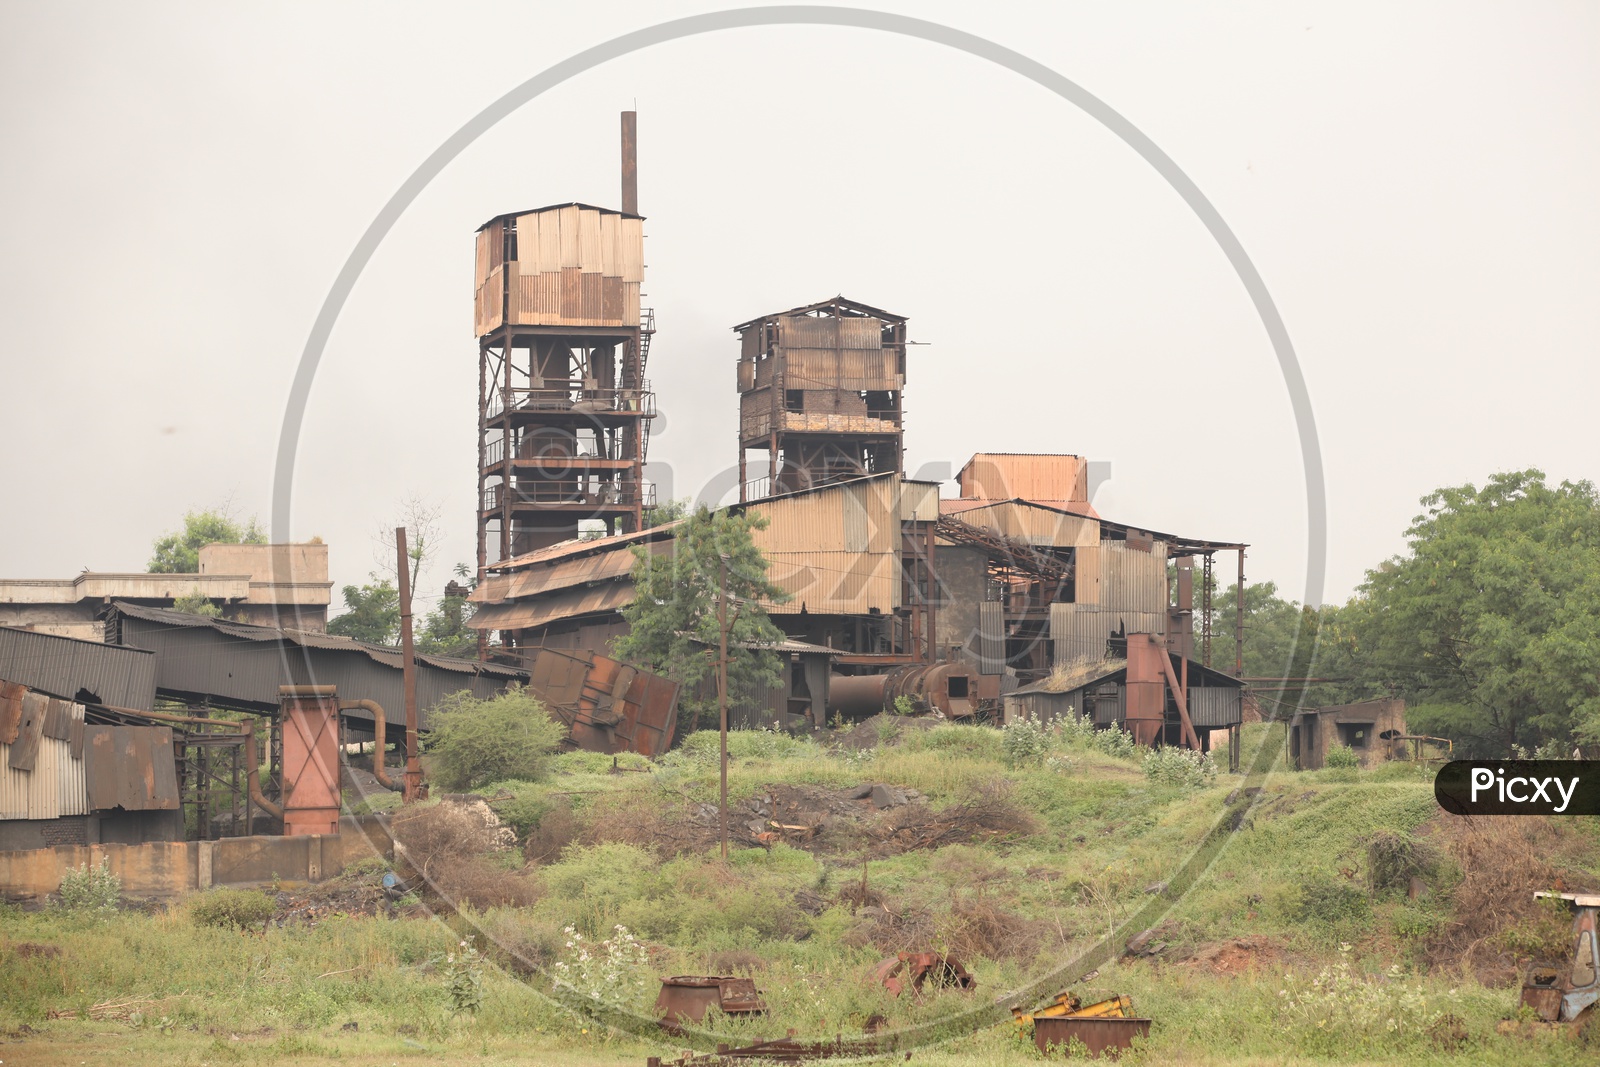 Ruins of a factory